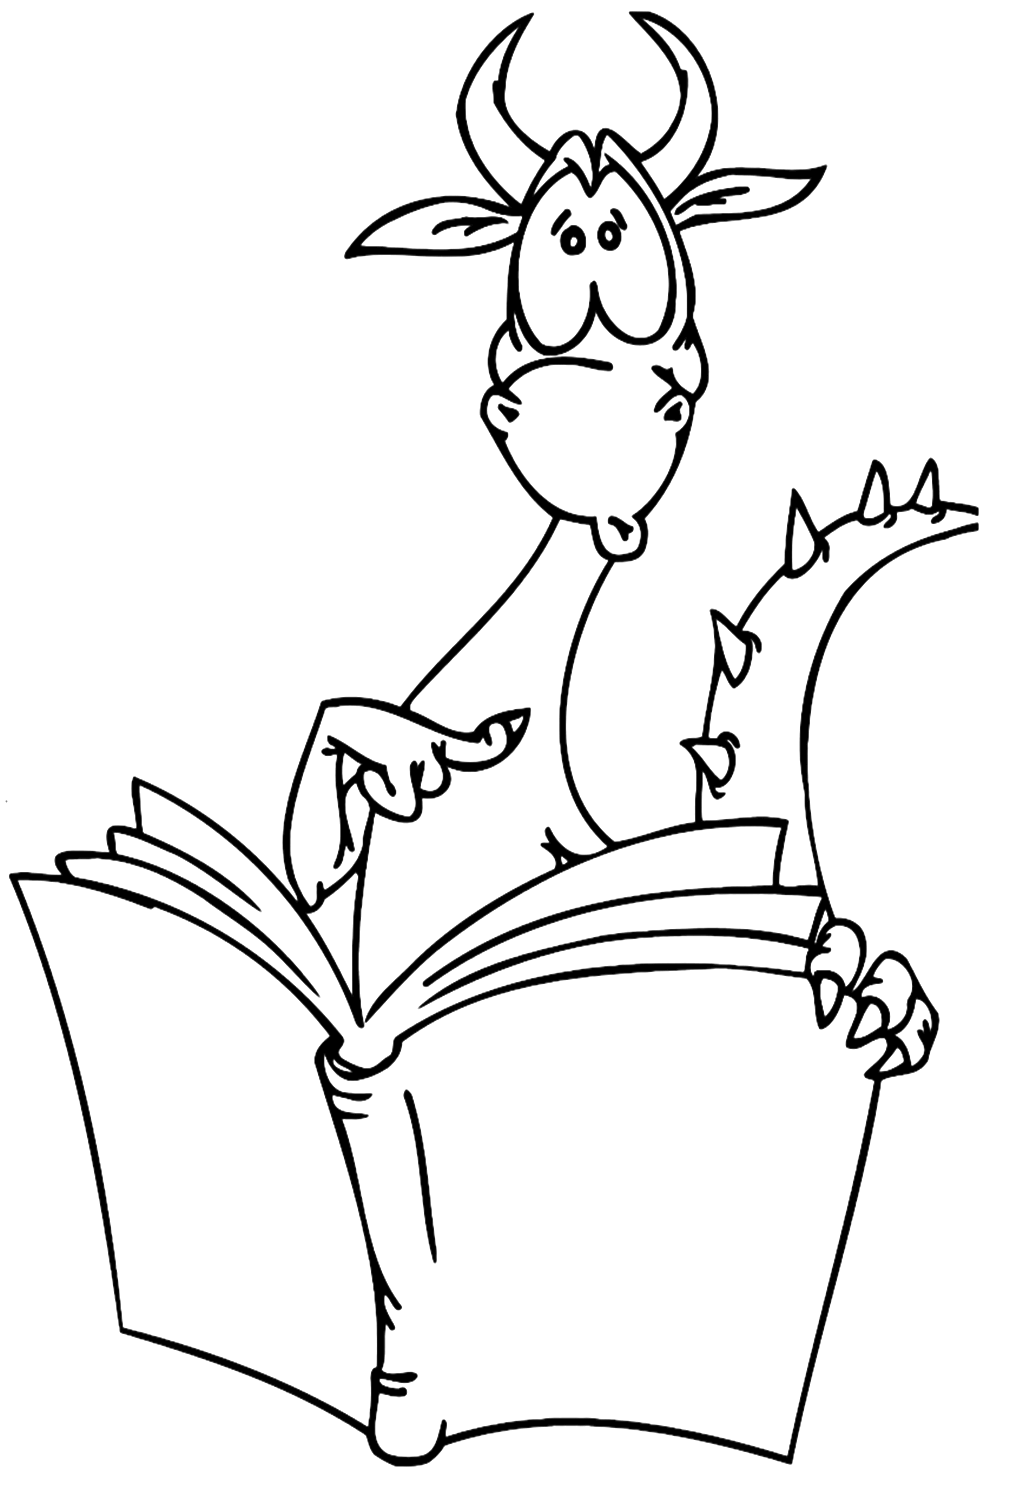 Modest Dragon With A Book Coloring Page